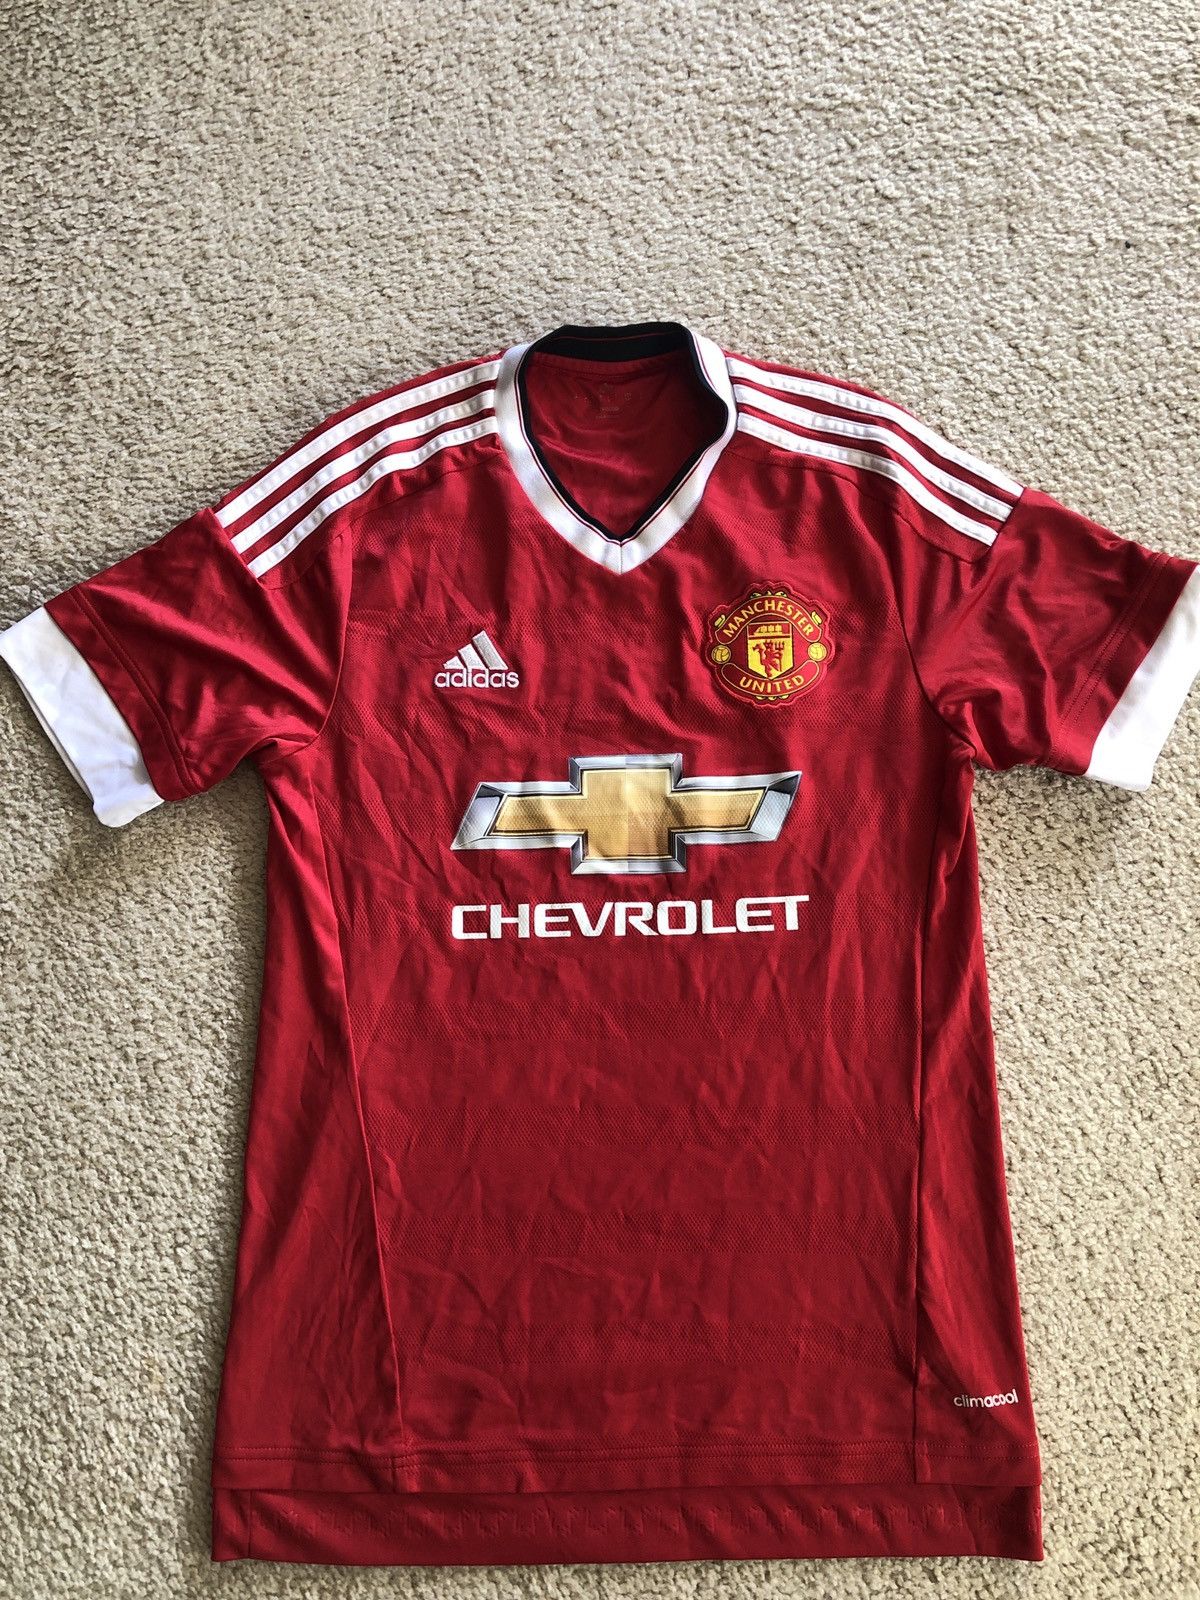 Adidas CHEVY MANCHESTER UNITED ADIDAS STRIPES JERSEY RED WHITE Size US S / EU 44-46 / 1 - 1 Preview